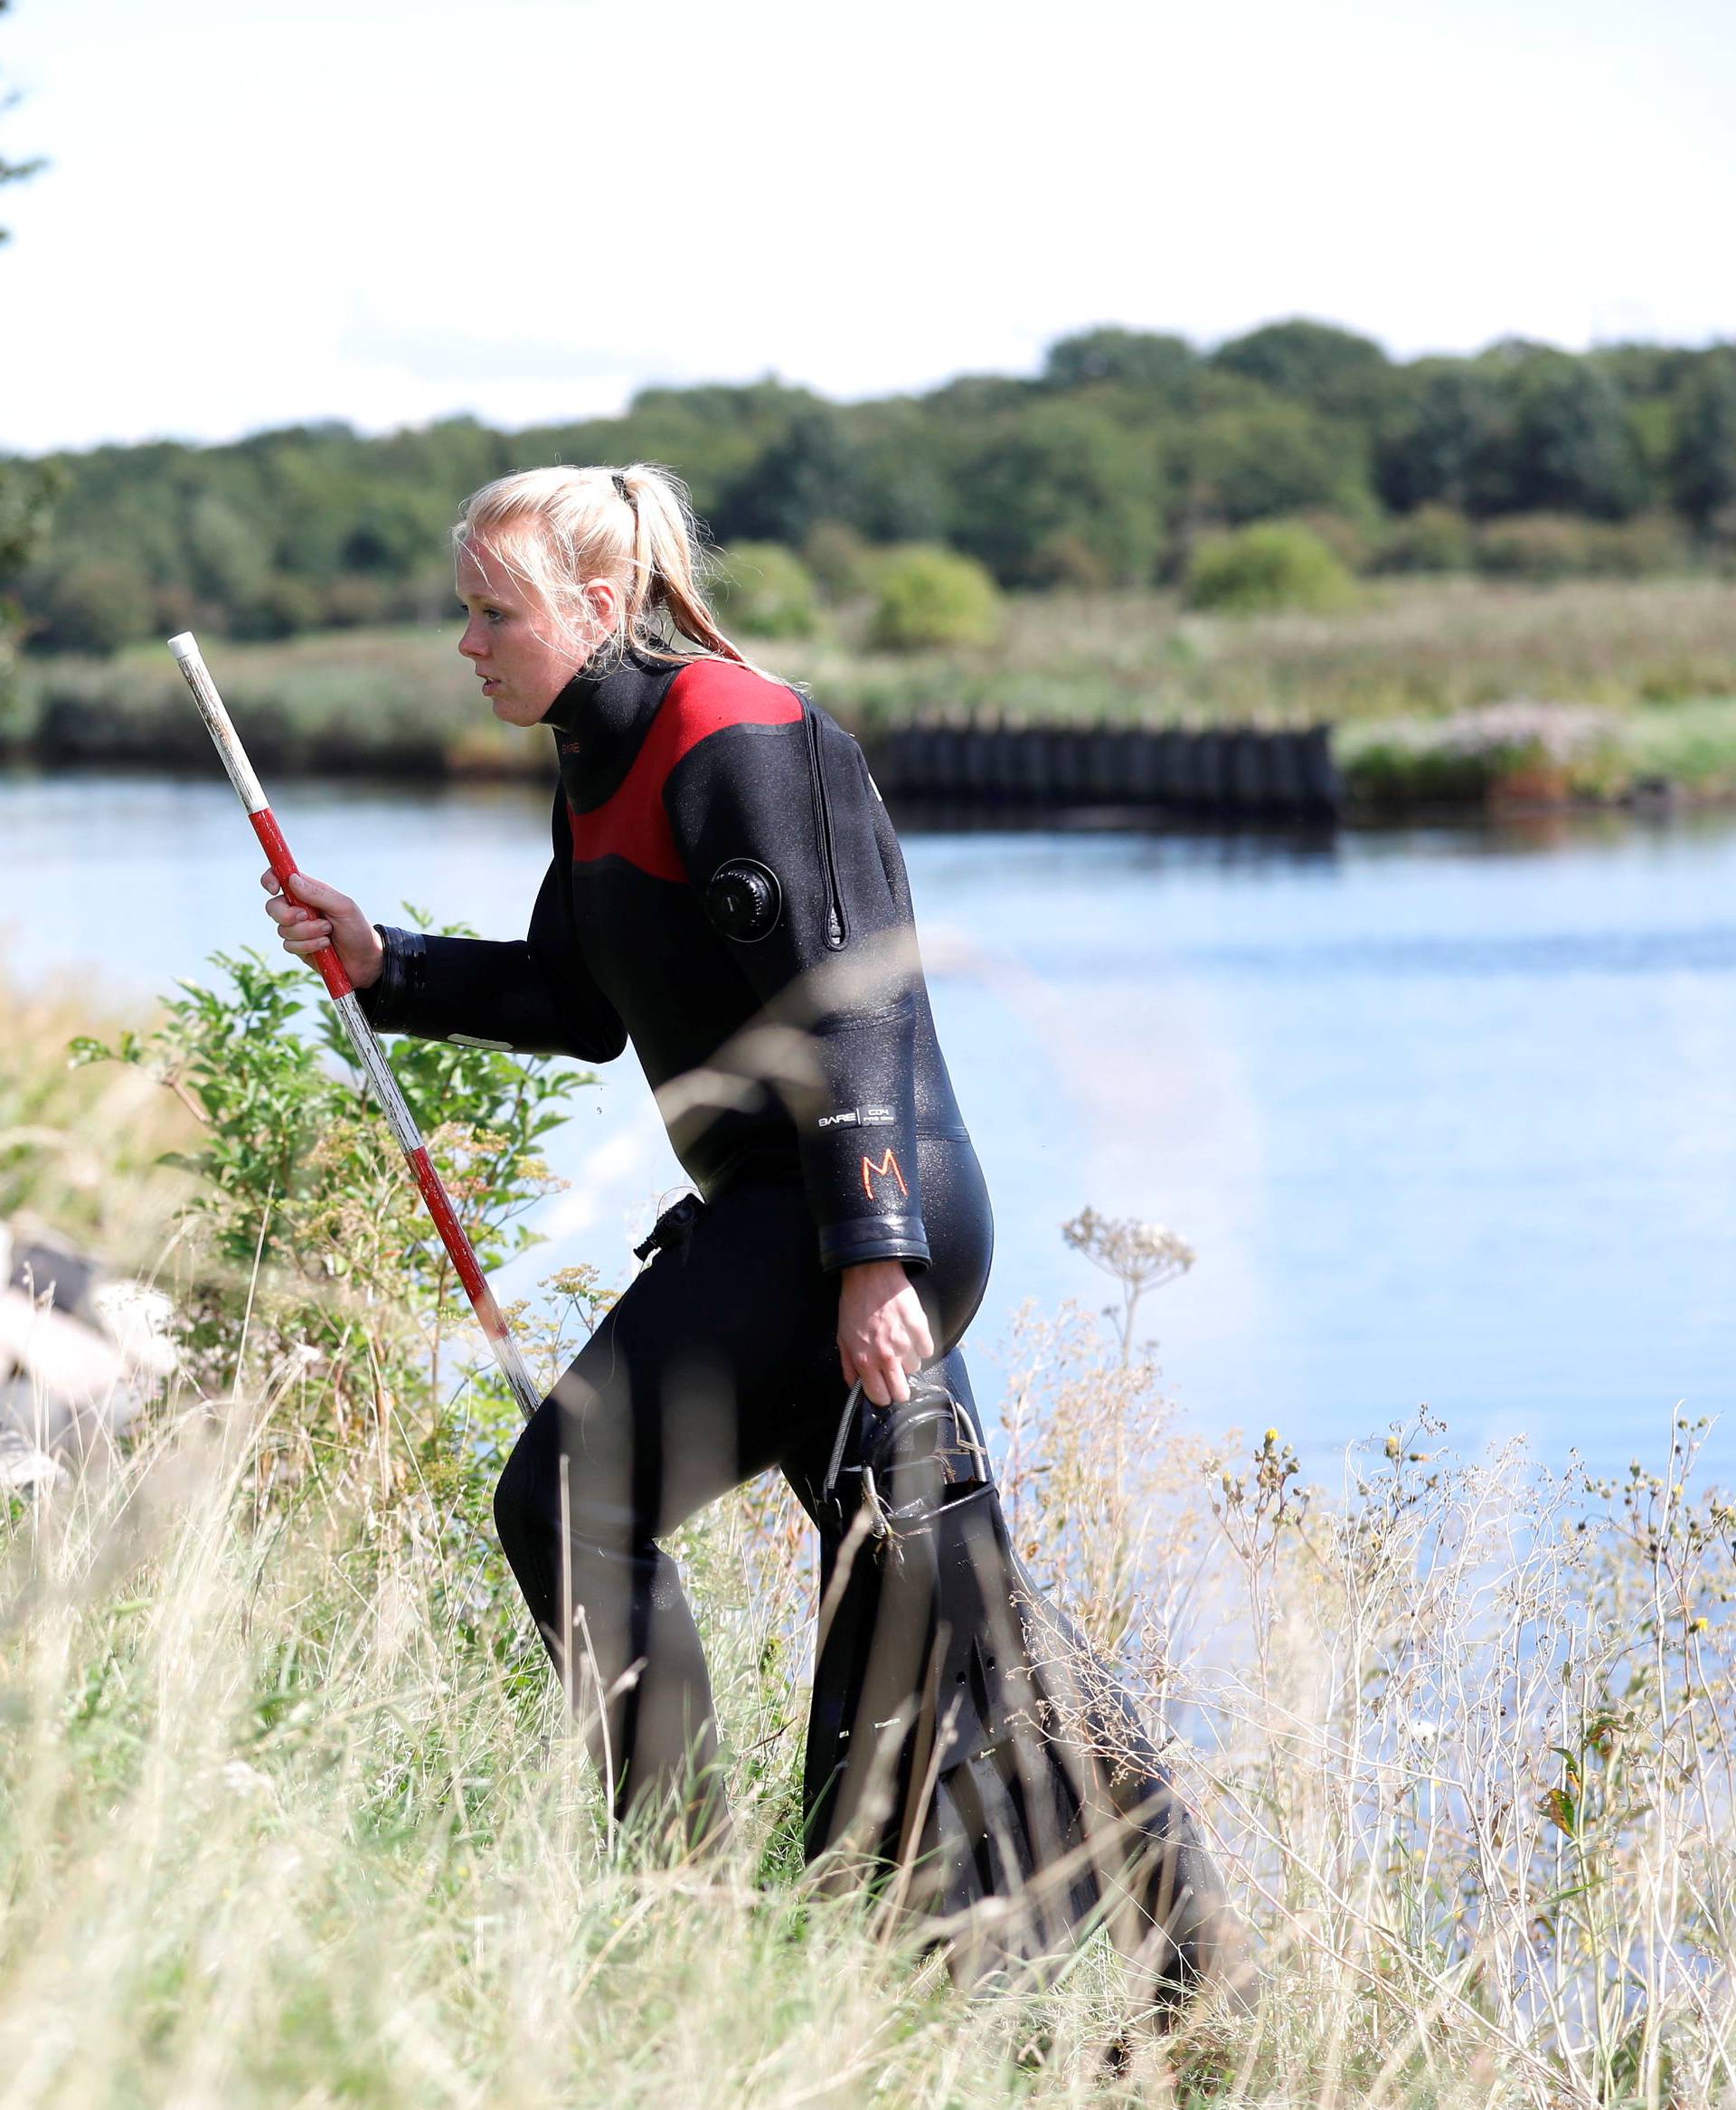 Members of the Danish Emergency Management Agency (DEMA) (Danish: Beredskabsstyrelsen) assist police at Kalvebod Faelled in search of missing body parts of journalist Kim Wall close to the site where her torso was found, in Copenhagen